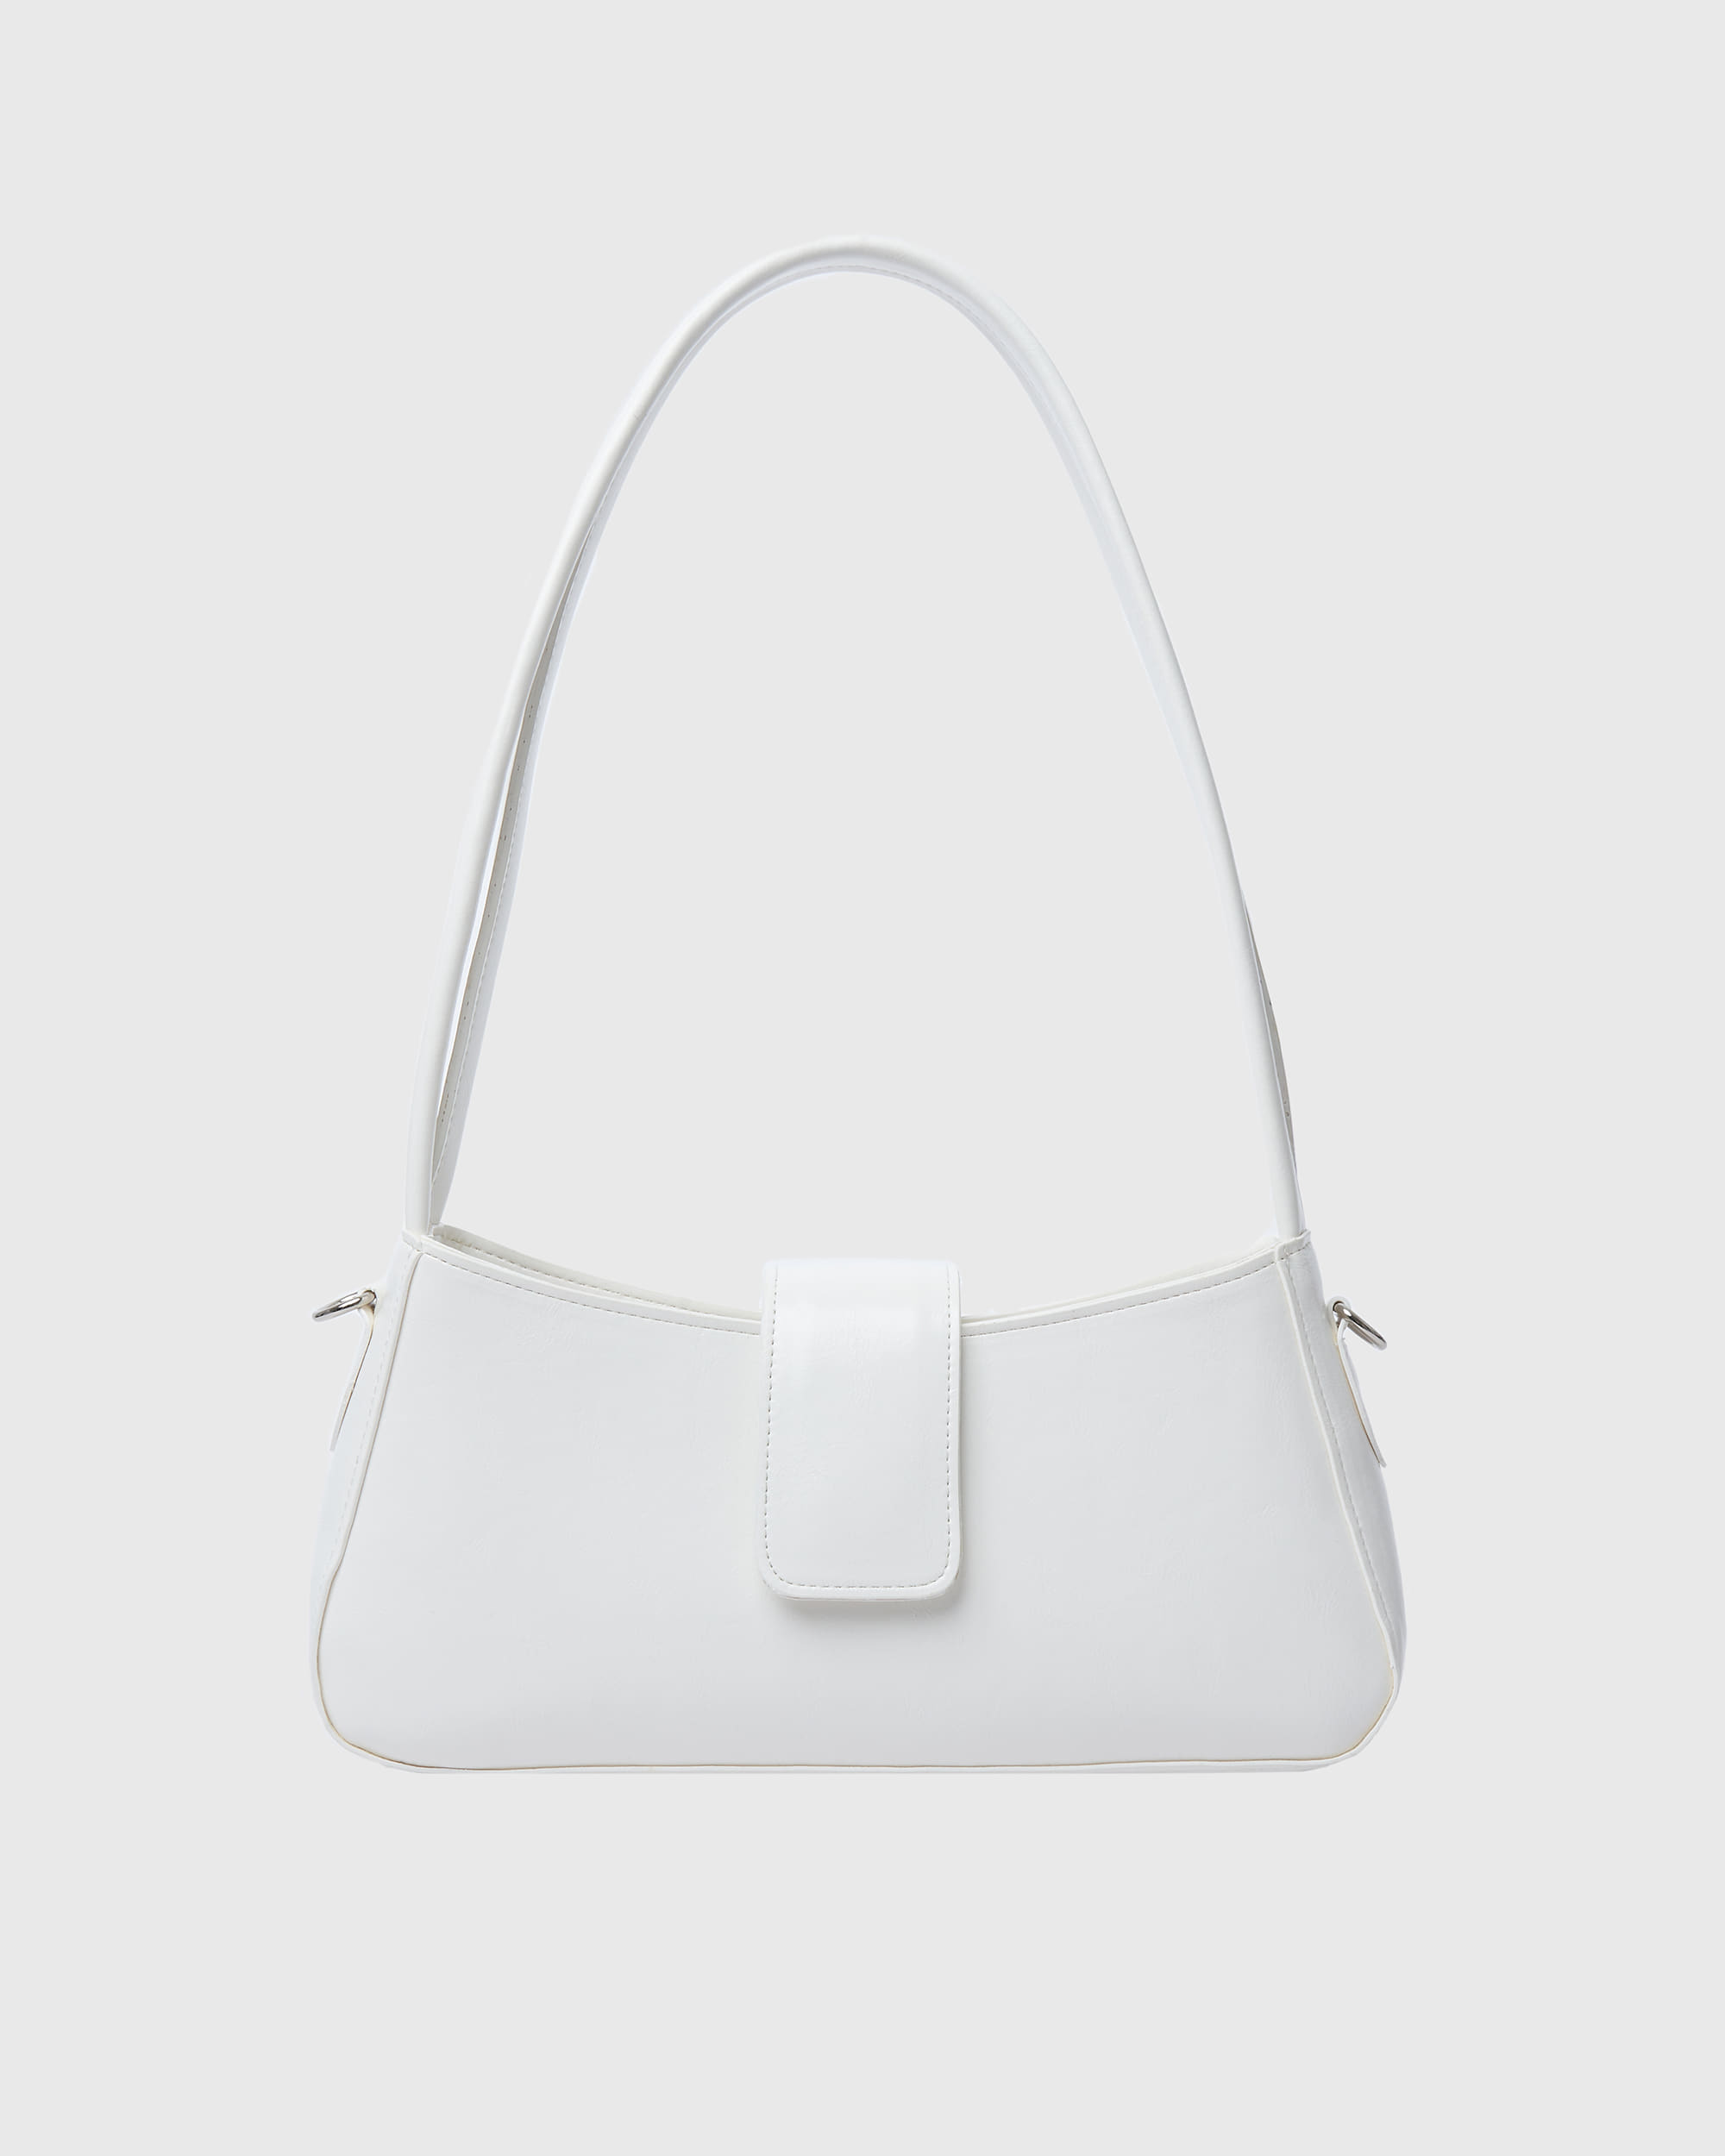 Welly round square shoulder bag - ivory